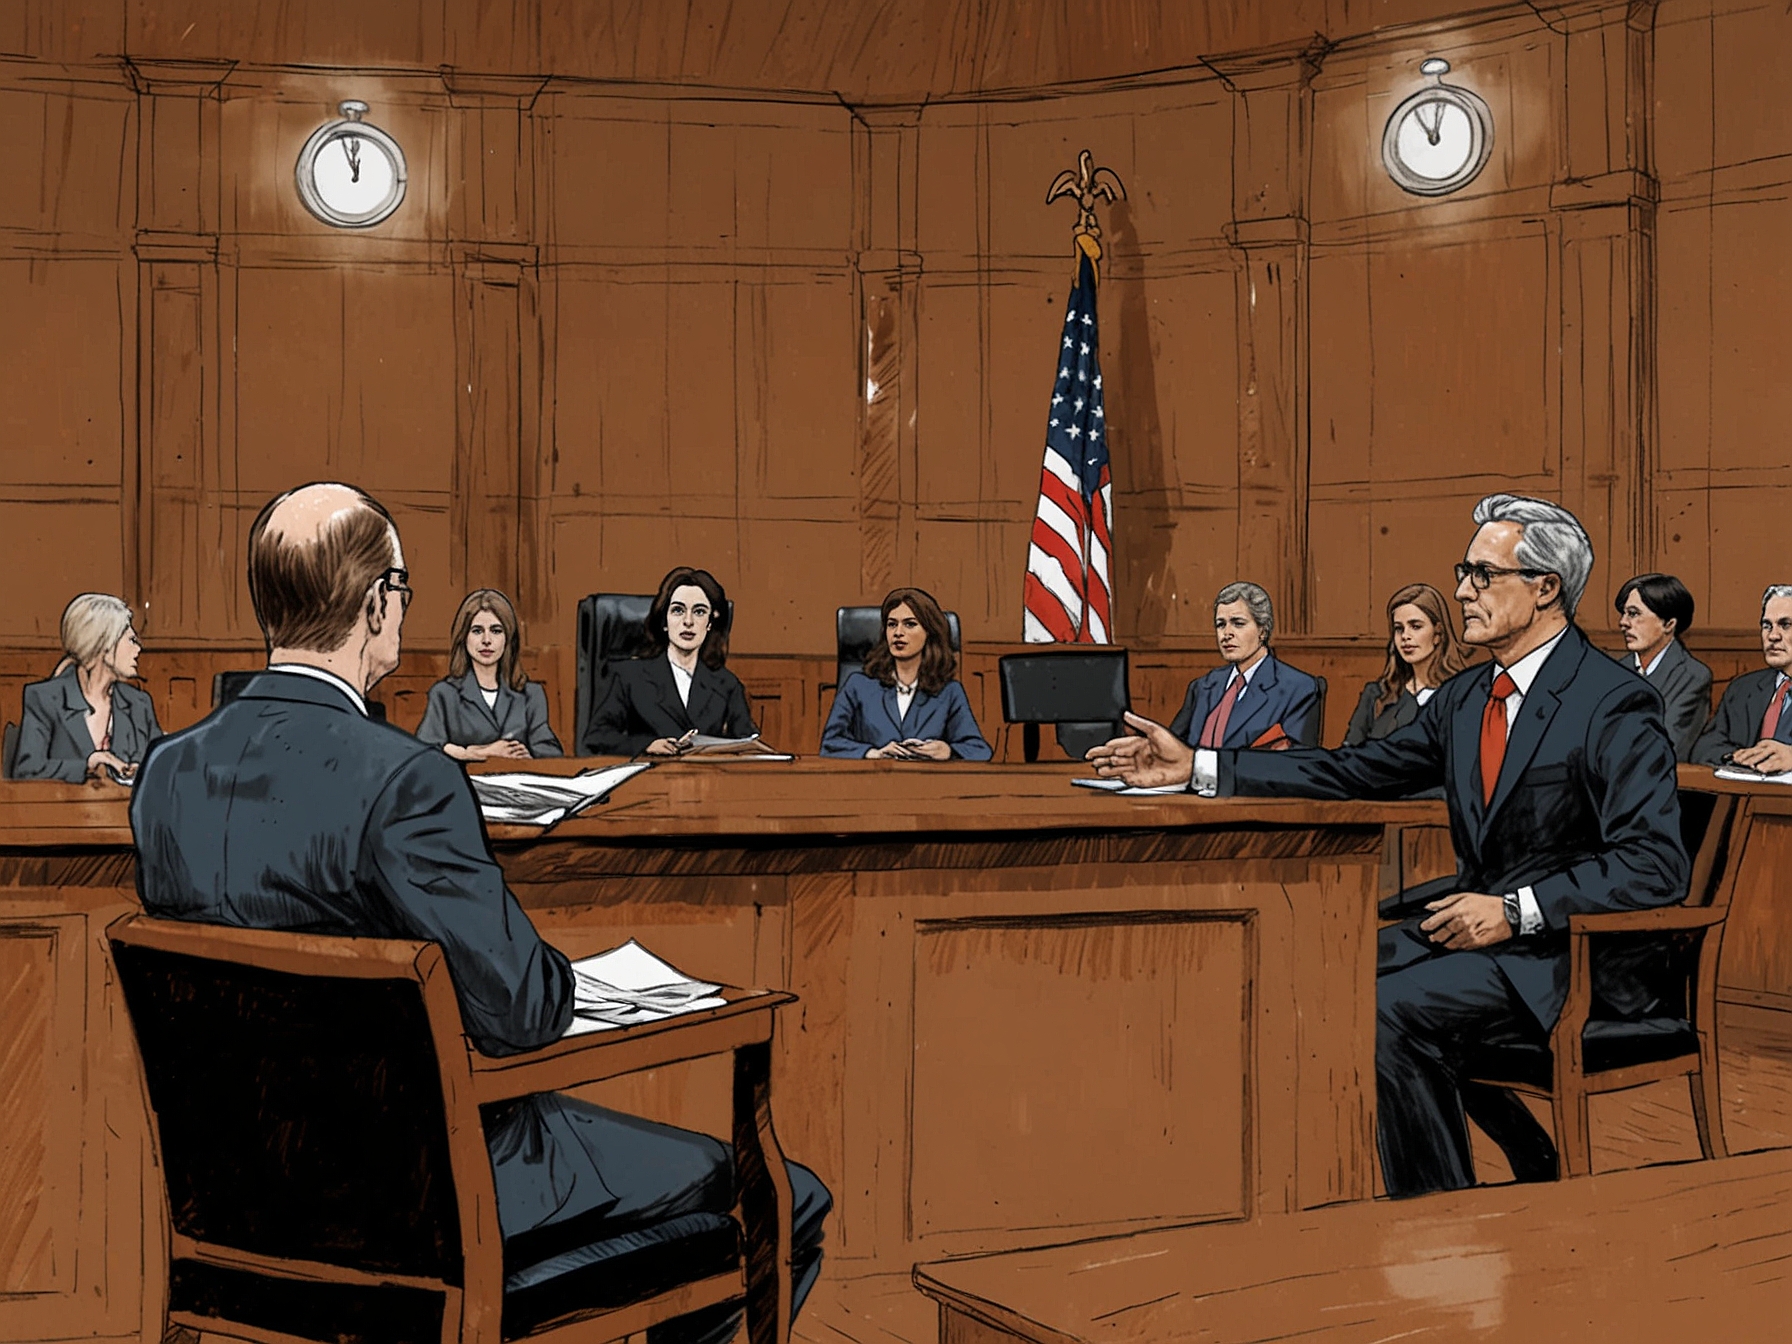 A tense courtroom scene during Lucy Letby's re-trial, showing the judge, jury, and legal teams as the trial progresses, highlighting the high stakes and divided opinions.